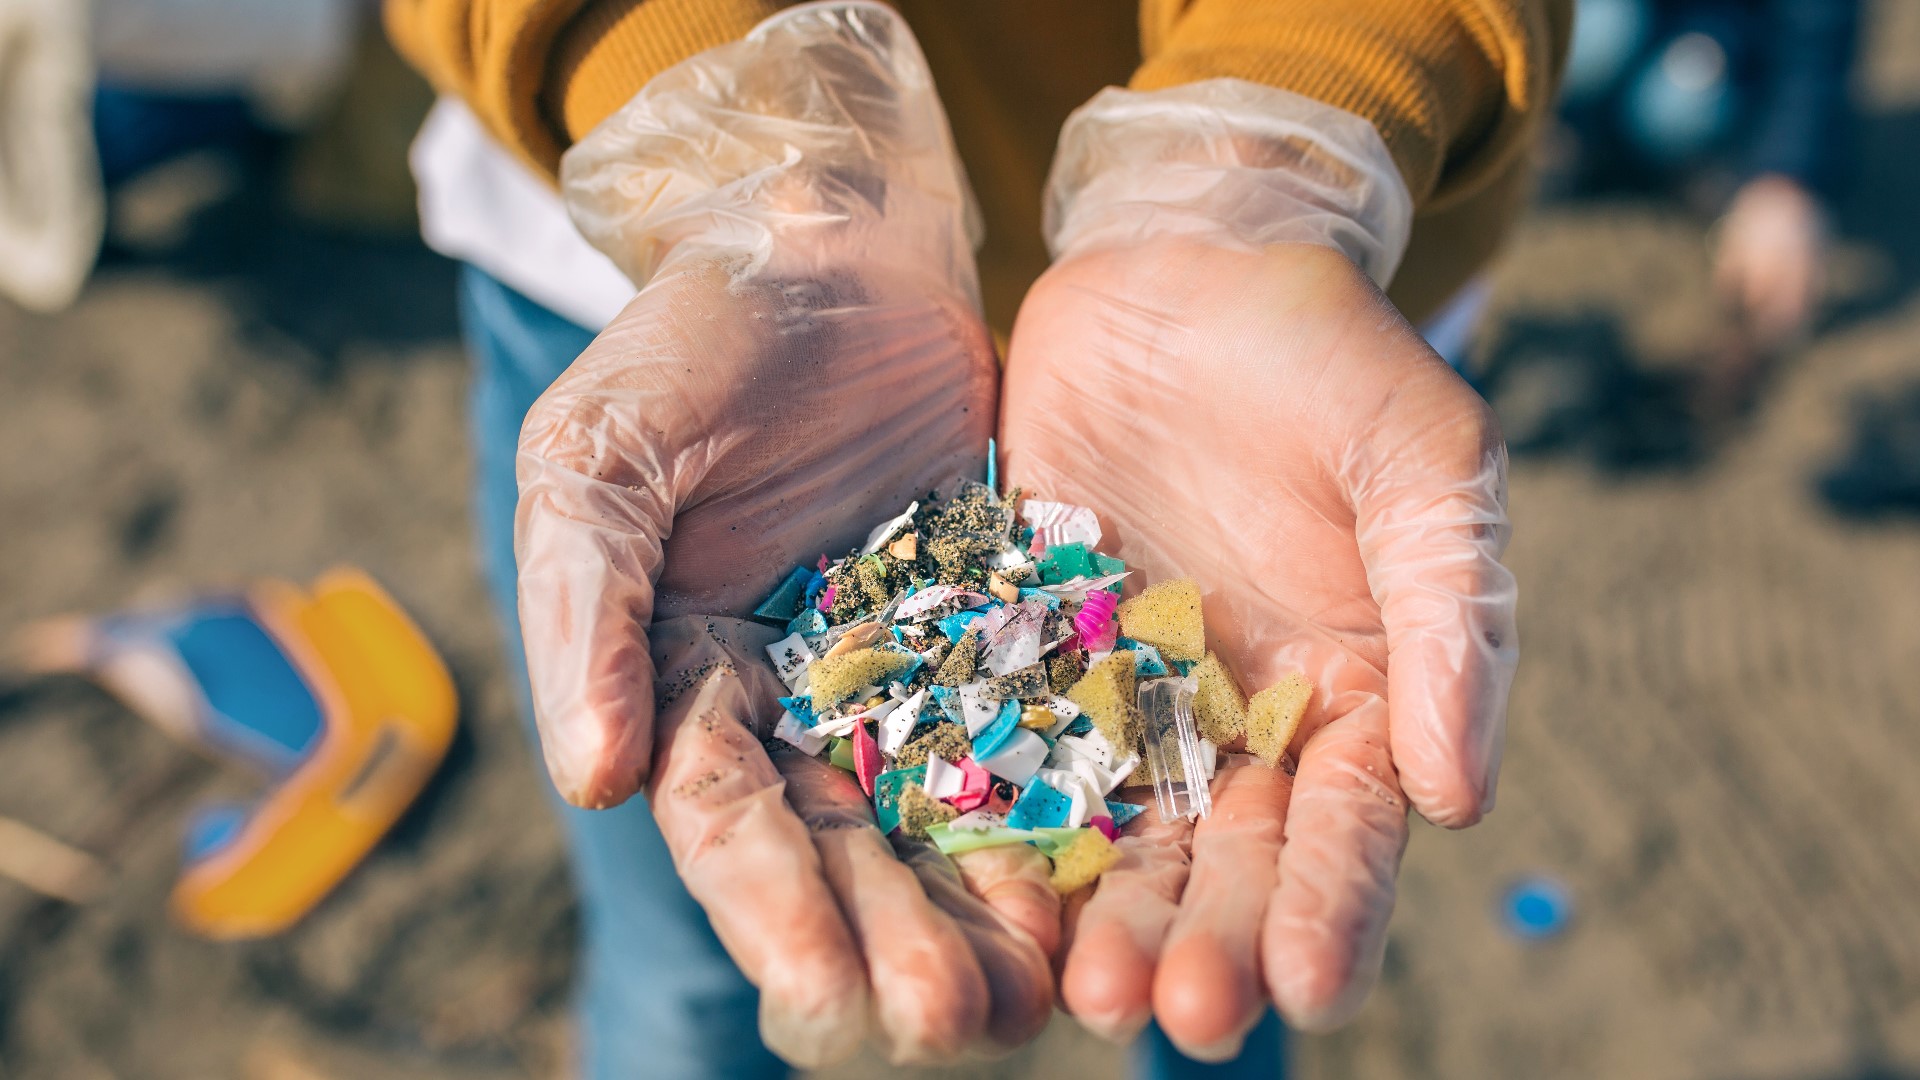 Previous research has found microplastics in our water, our air and even our food. So, it was a matter of time before it made its way to our bloodstream.